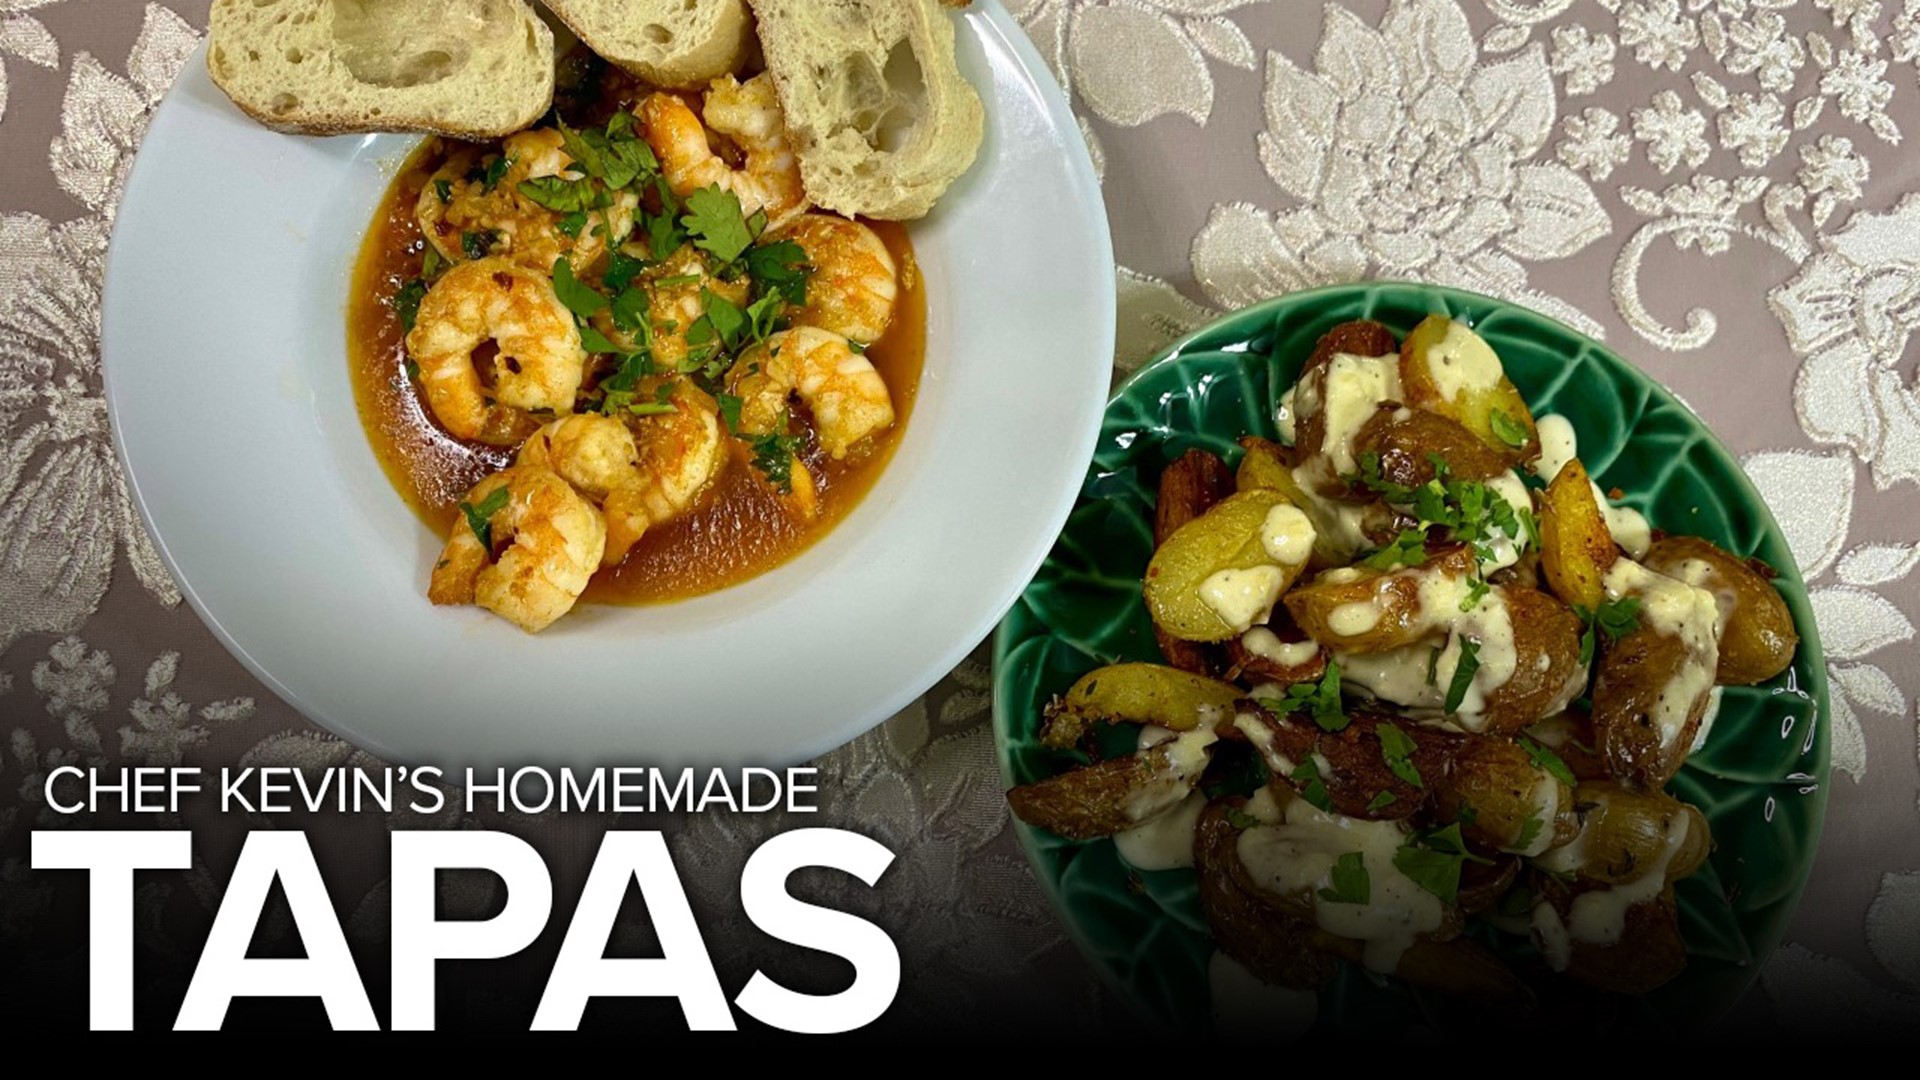 Today, I'm sharing some of my favorite tapas recipes with you!